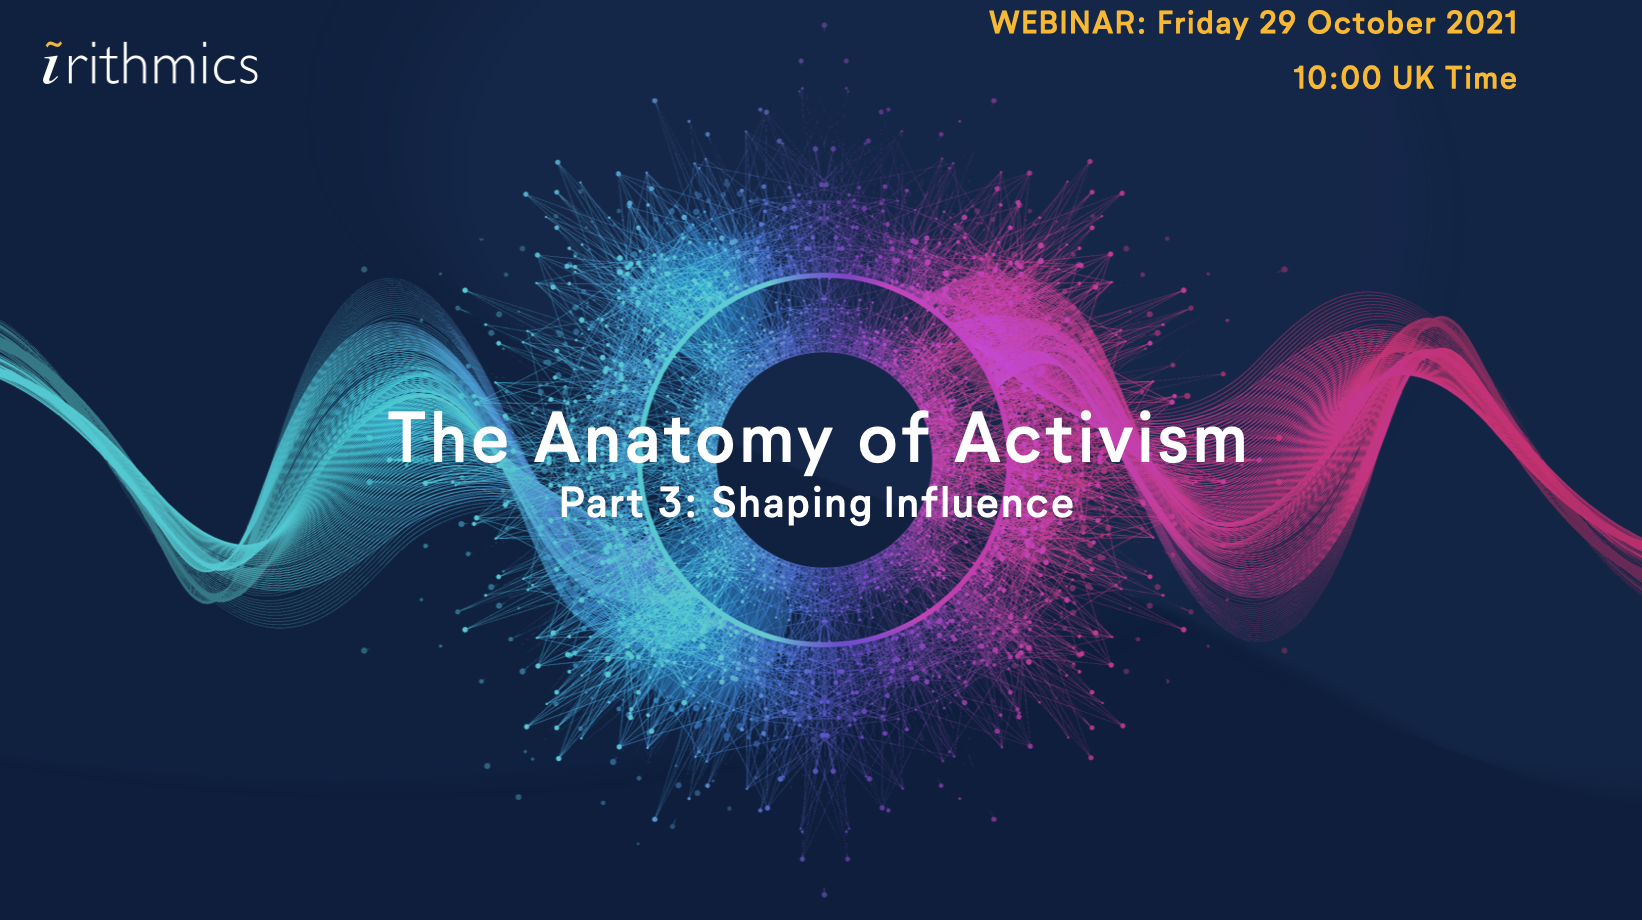 The Anatomy of Activism (Part 3: Shaping Influence) Friday 29 October 2021